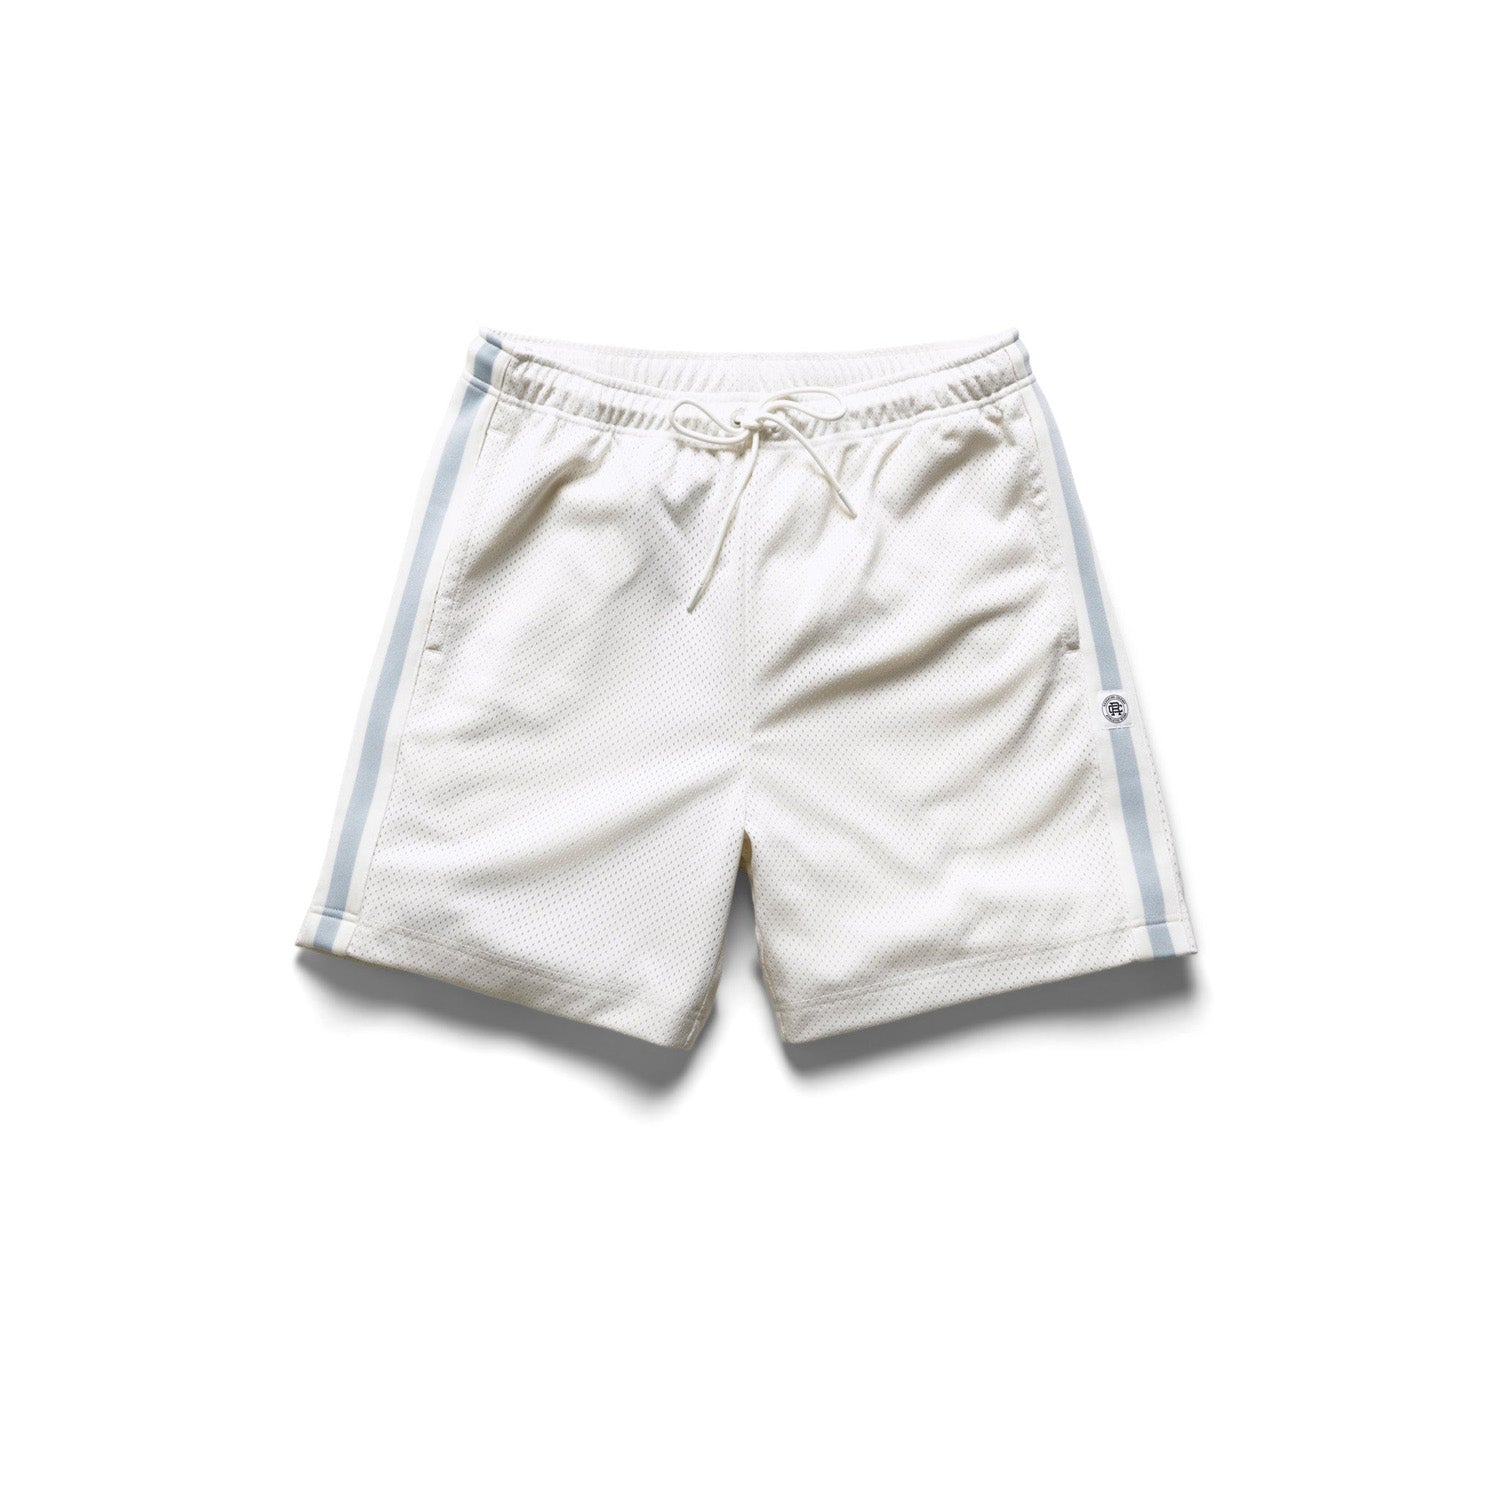 Go to ACCESSORIES - SHORTS - Canada